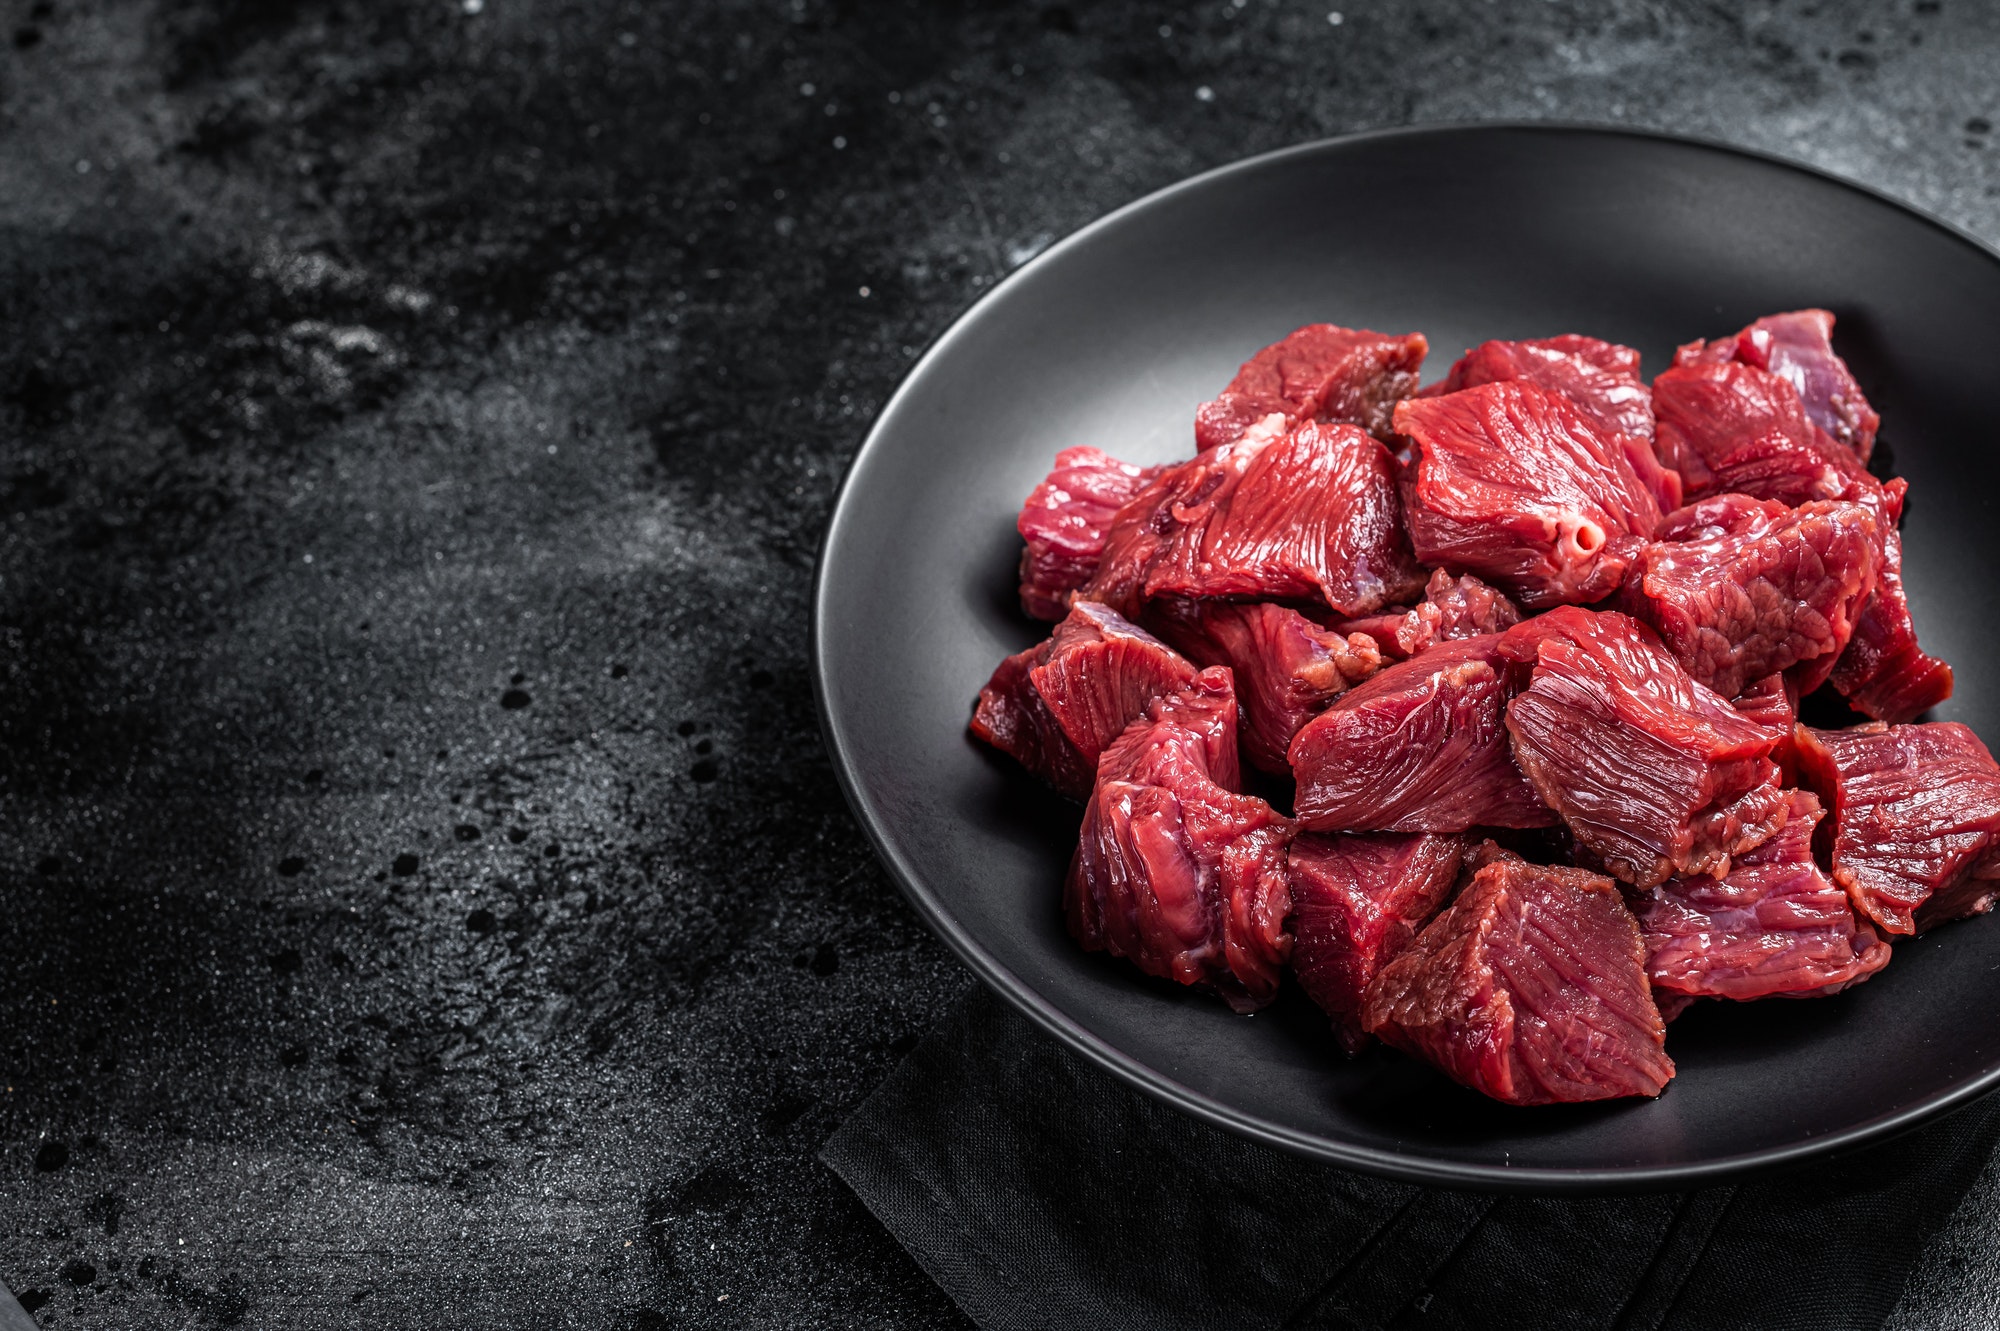 Raw Diced game meat of wild venison dear. Black background. Top view. Copy space